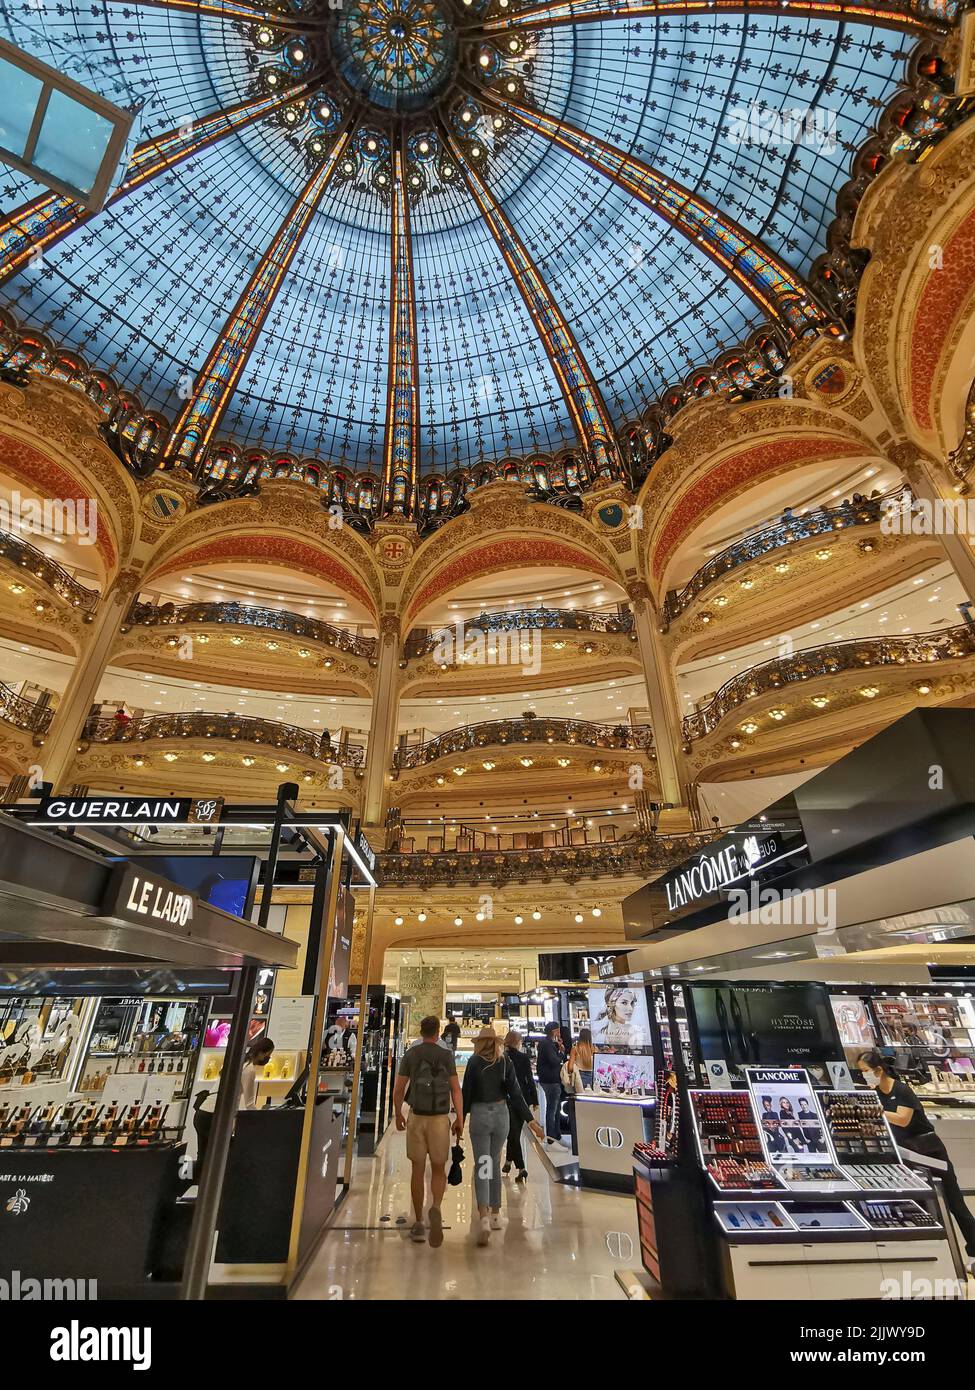 France, Paris, Galeries Lafayette a luxury shopping department store. The Galeries Lafayette offers its visitors a splendid glass Cupola, rising to a Stock Photo